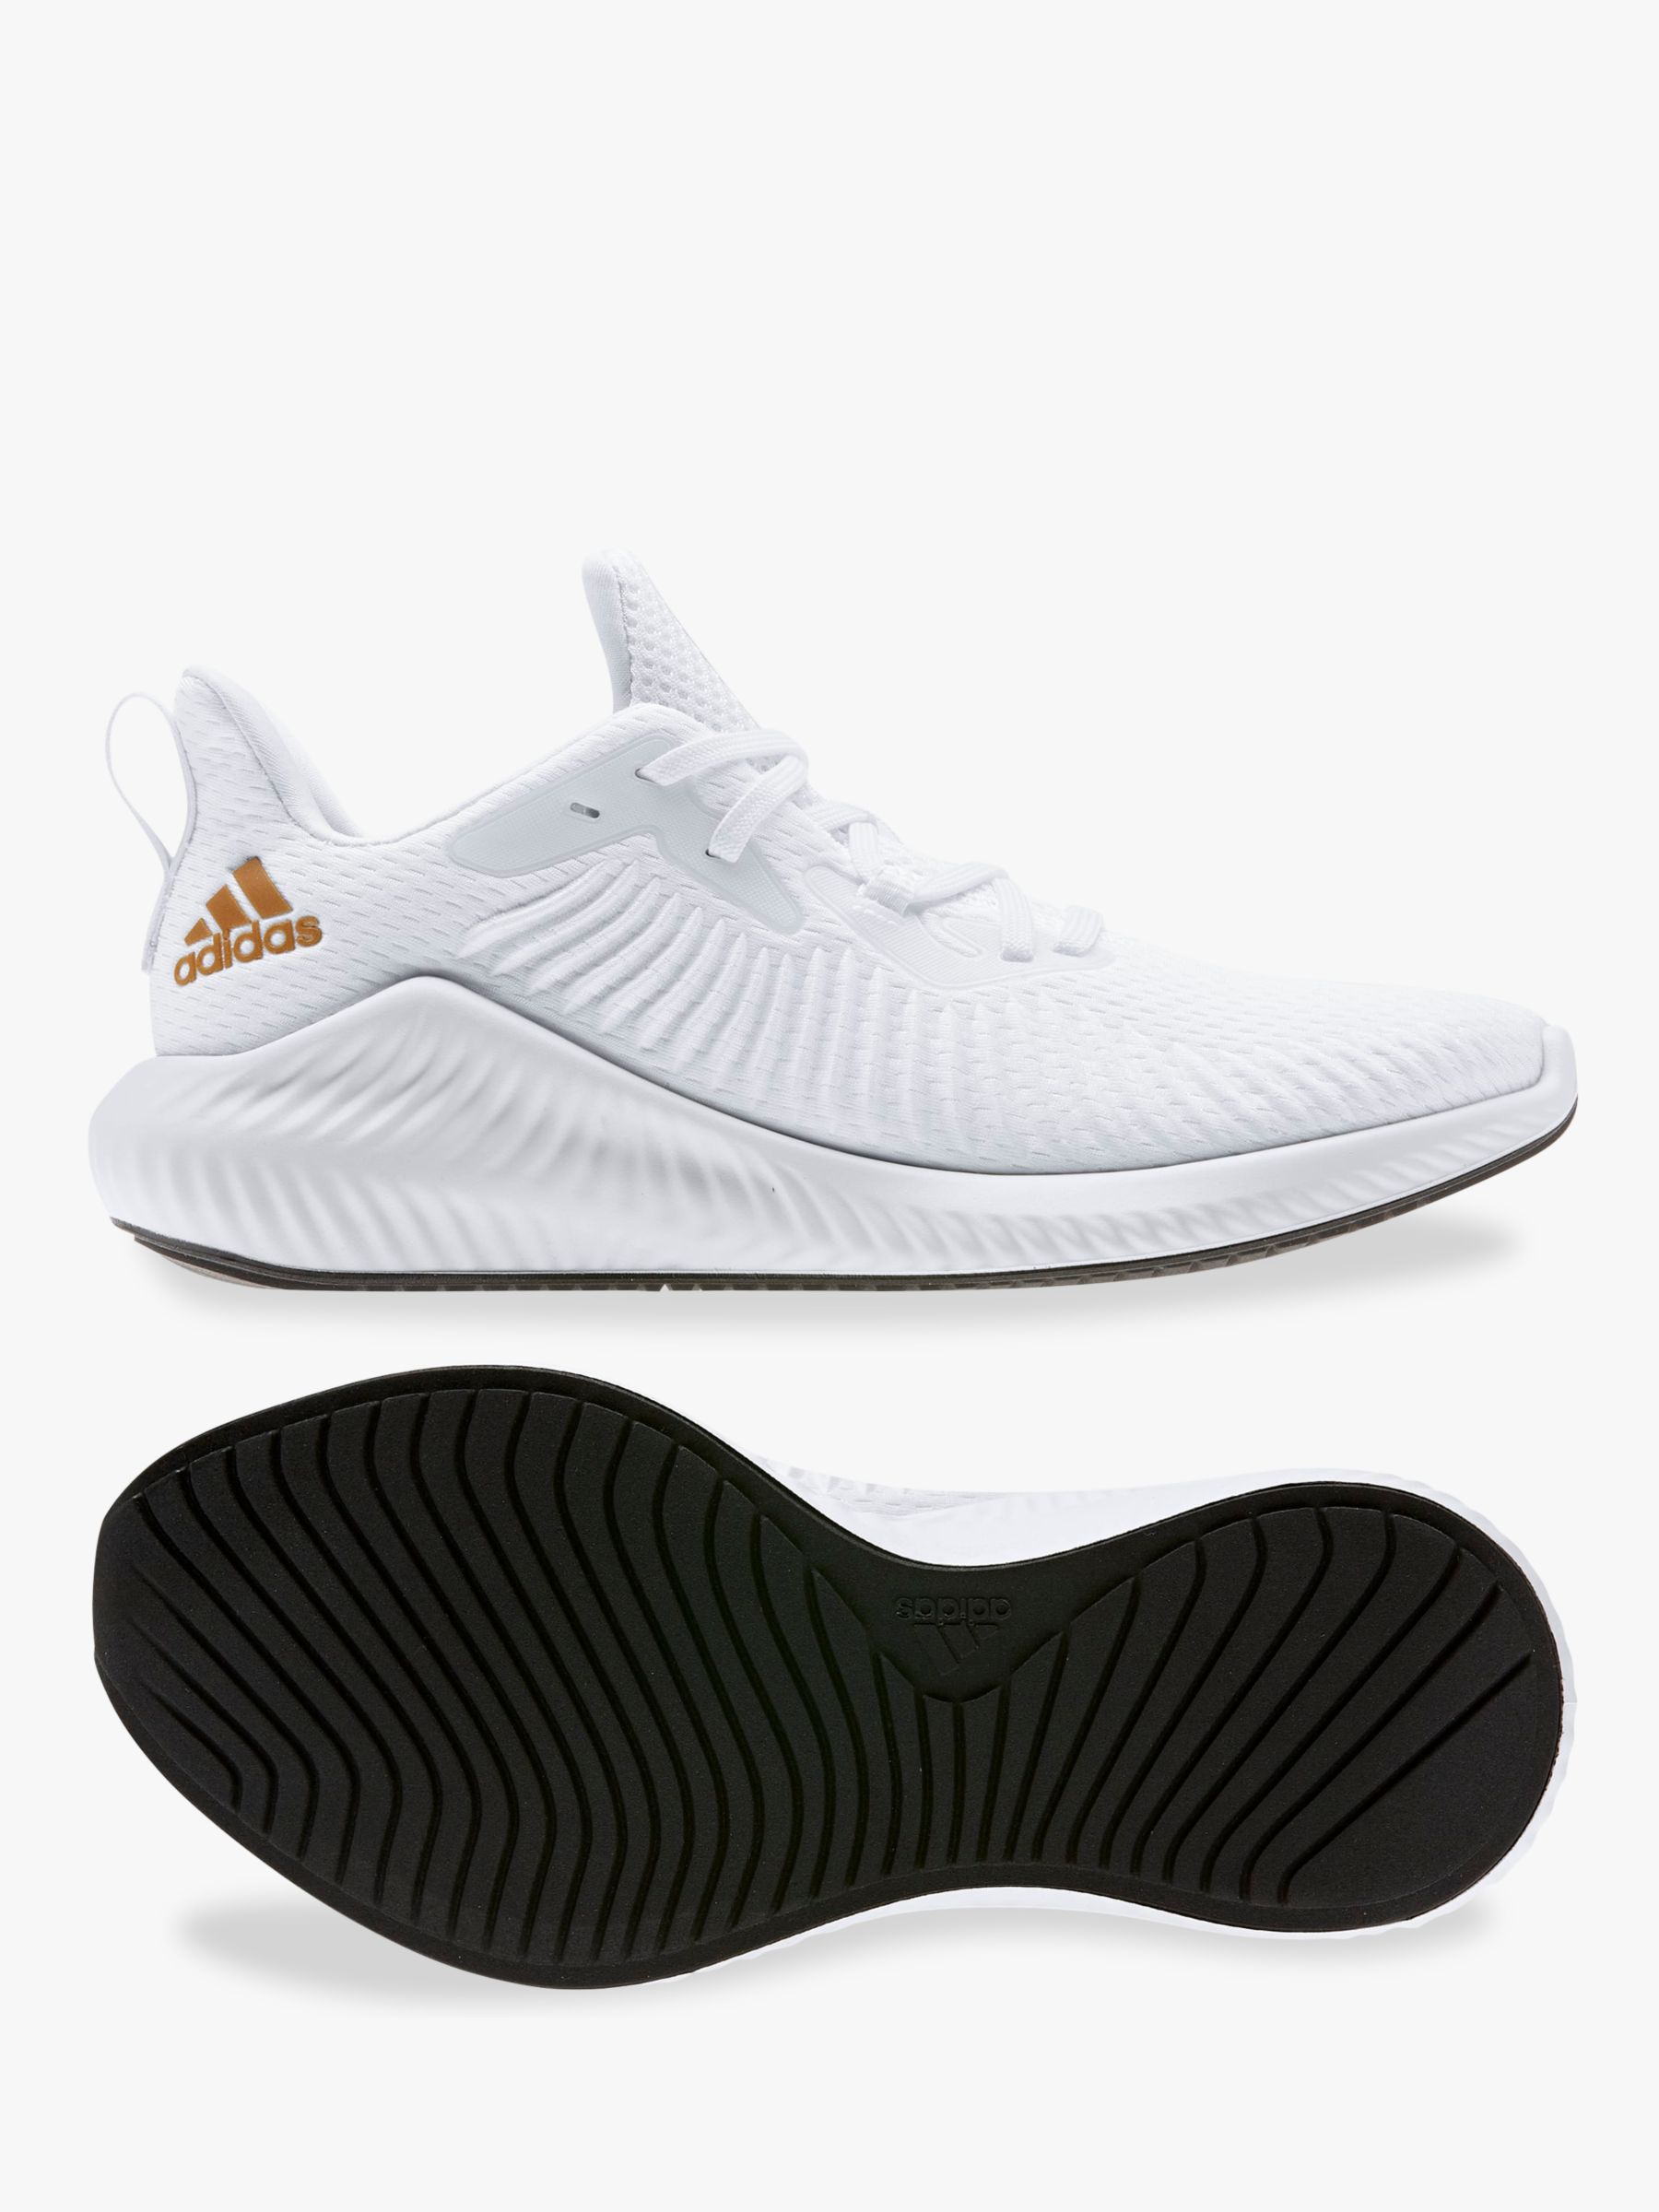 adidas alphabounce white and gold